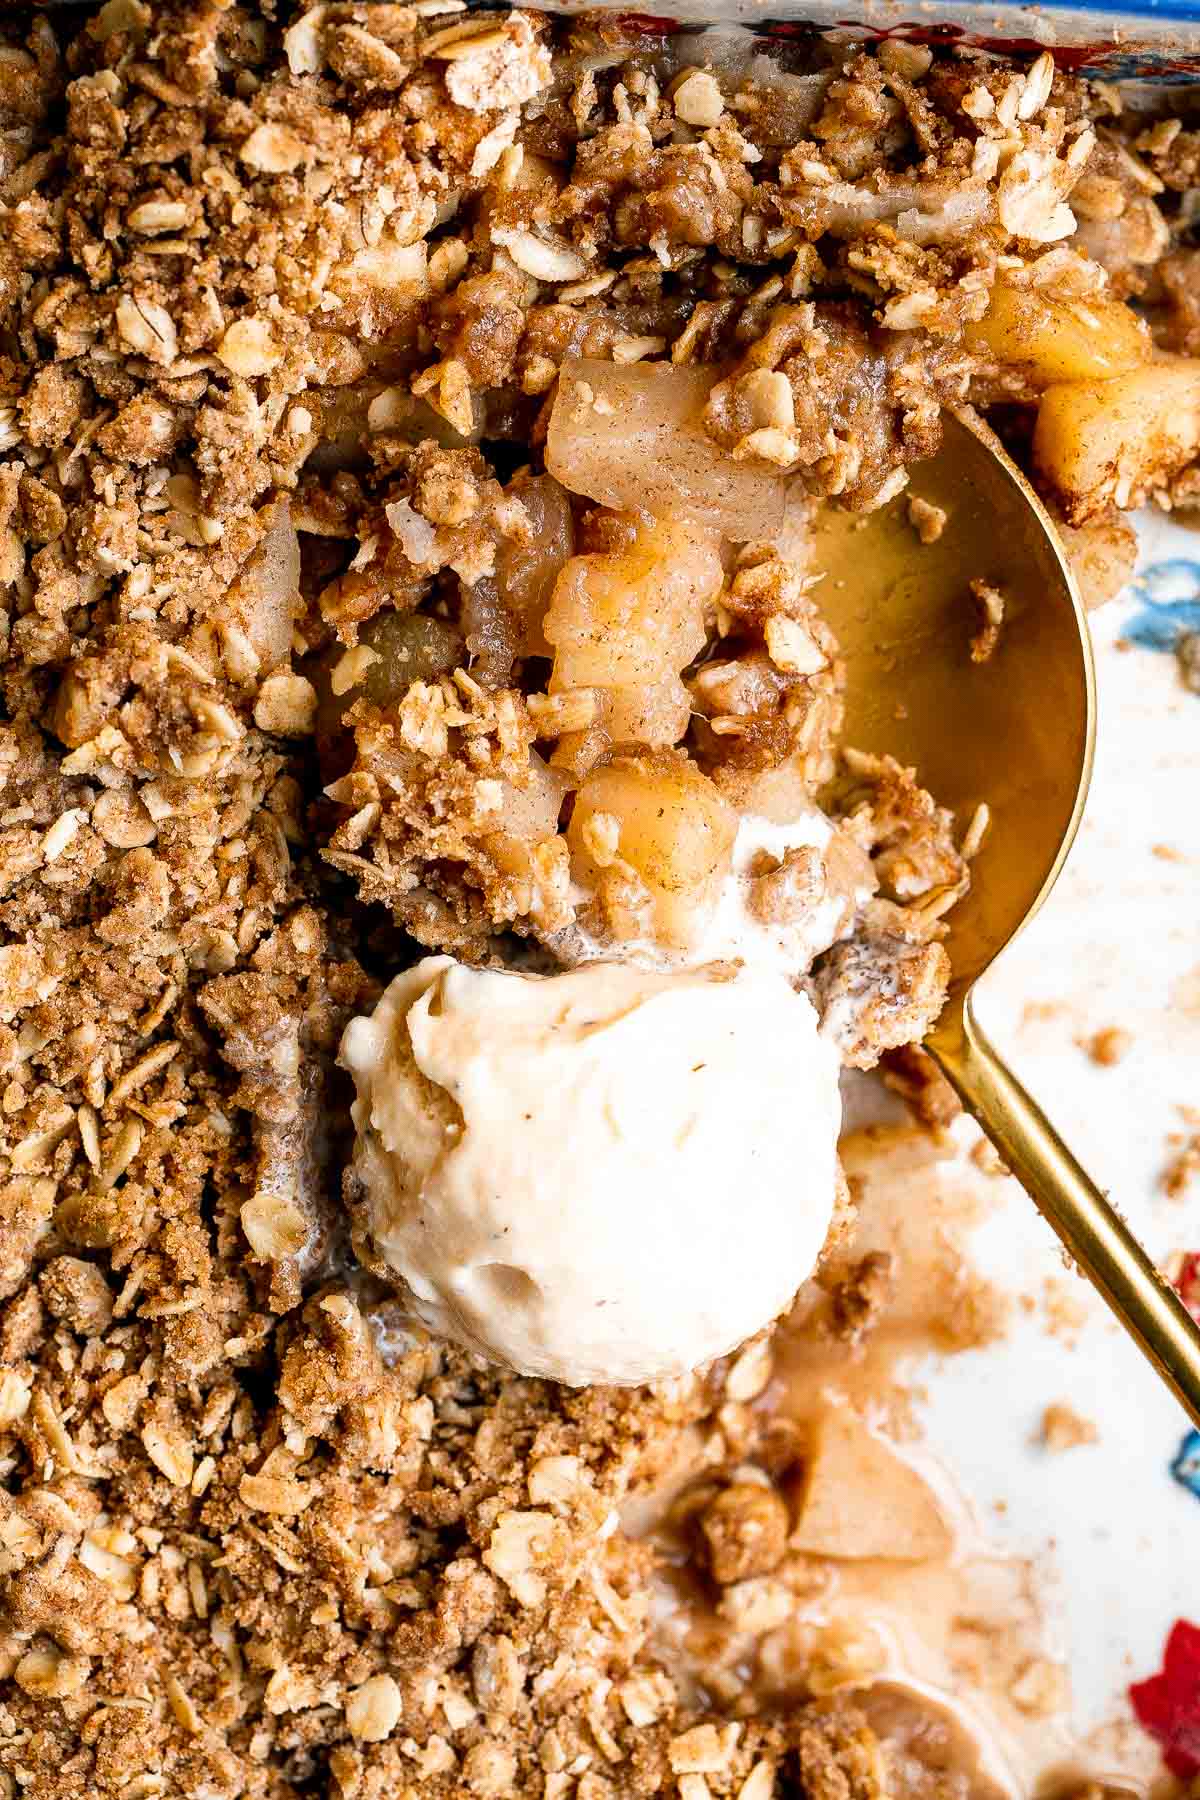 Apple crisp with tender cinnamon-sugar apples and crispy oat topping is sweet, tart, and just as delicious as an apple pie but takes a lot less effort. | aheadofthyme.com